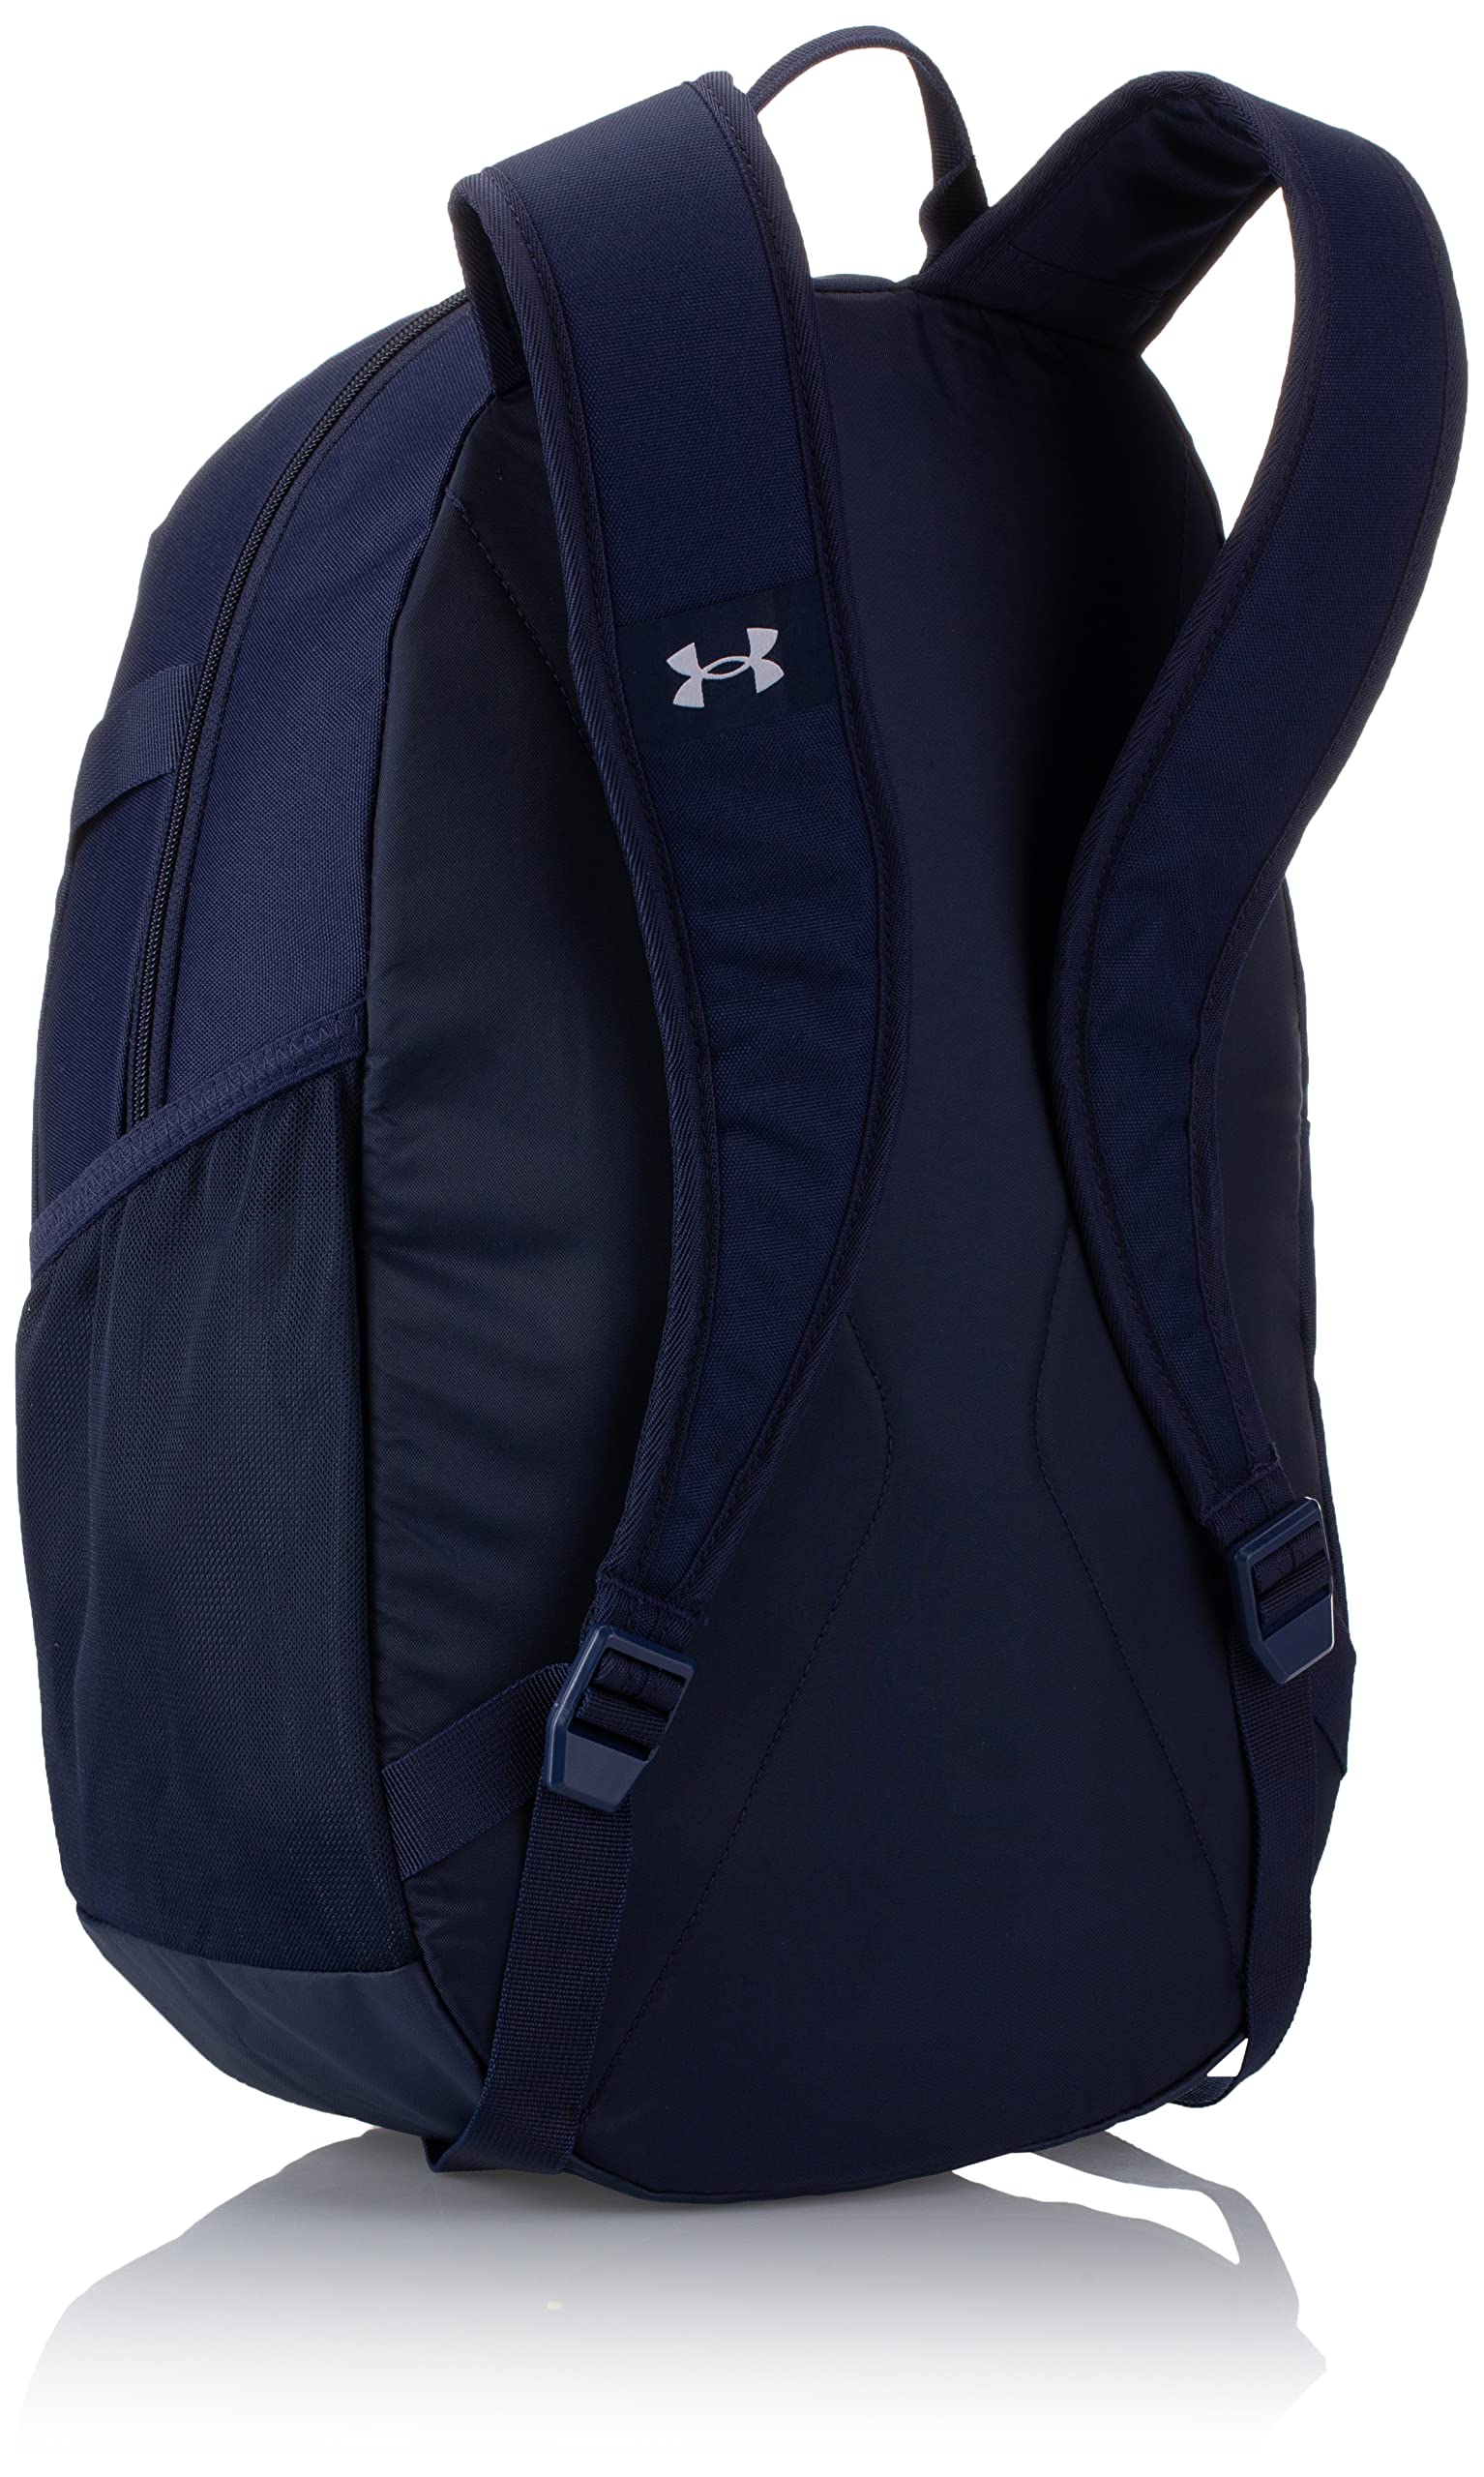 Under Armour Unisex-Adult Hustle Lite Backpack , (410) Midnight Navy / Midnight Navy / Metallic Silver , One Size Fits All